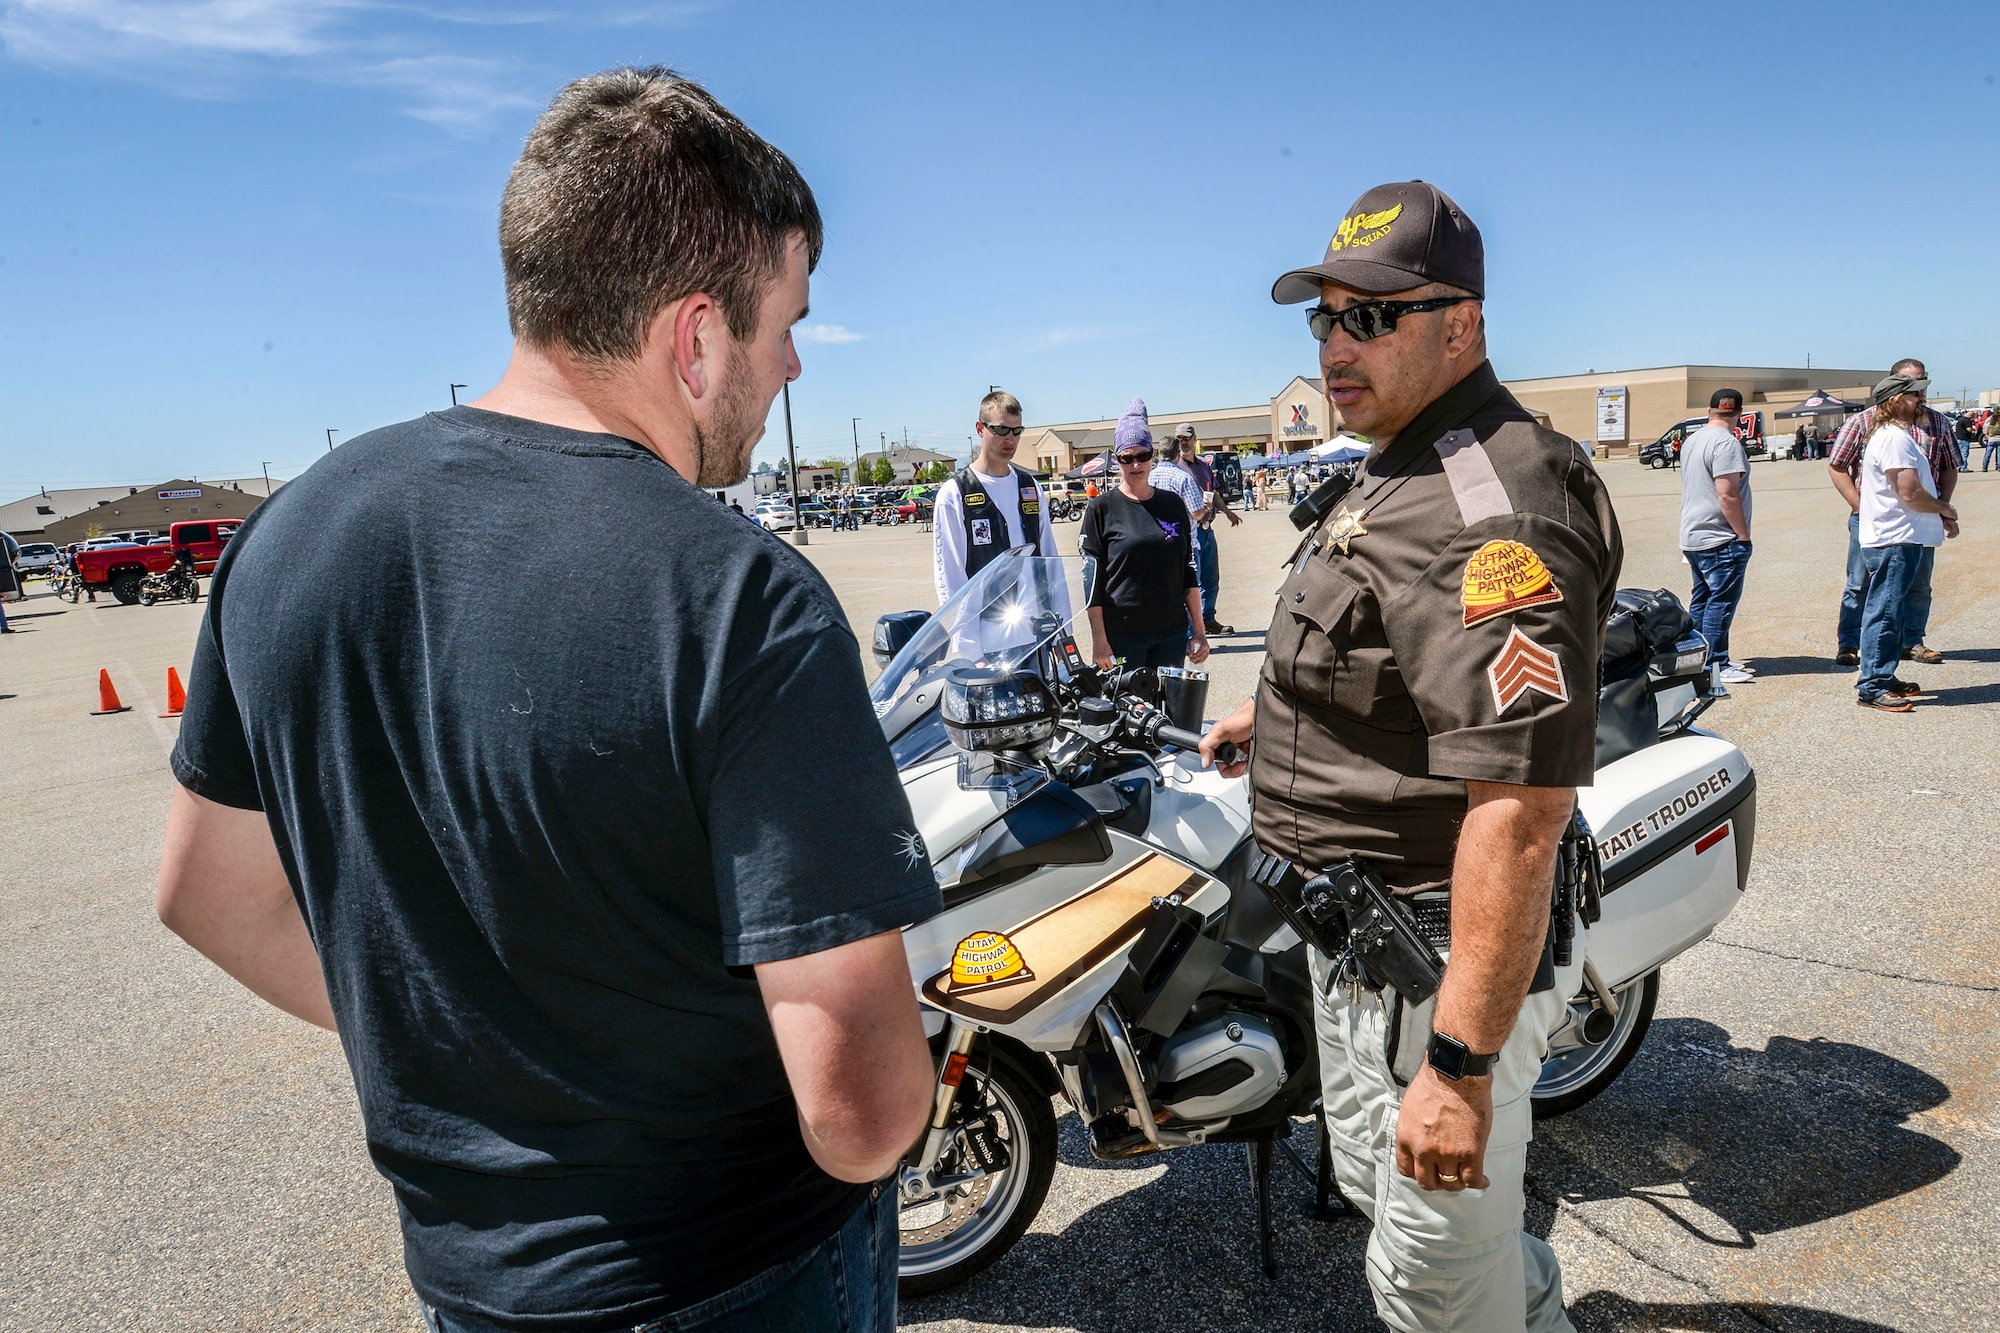 Sgt. Donavan Lucas of the Utah Highway Patrol talks motorcycle safety with a Hill Air Force Base employee, May 11. Besides safety briefings and demonstrations, Hill AFB’s 3rd Annual Motorcycle Rodeo featured food, vendor displays and radio programming. (U.S. Air Force/Paul Holcomb)